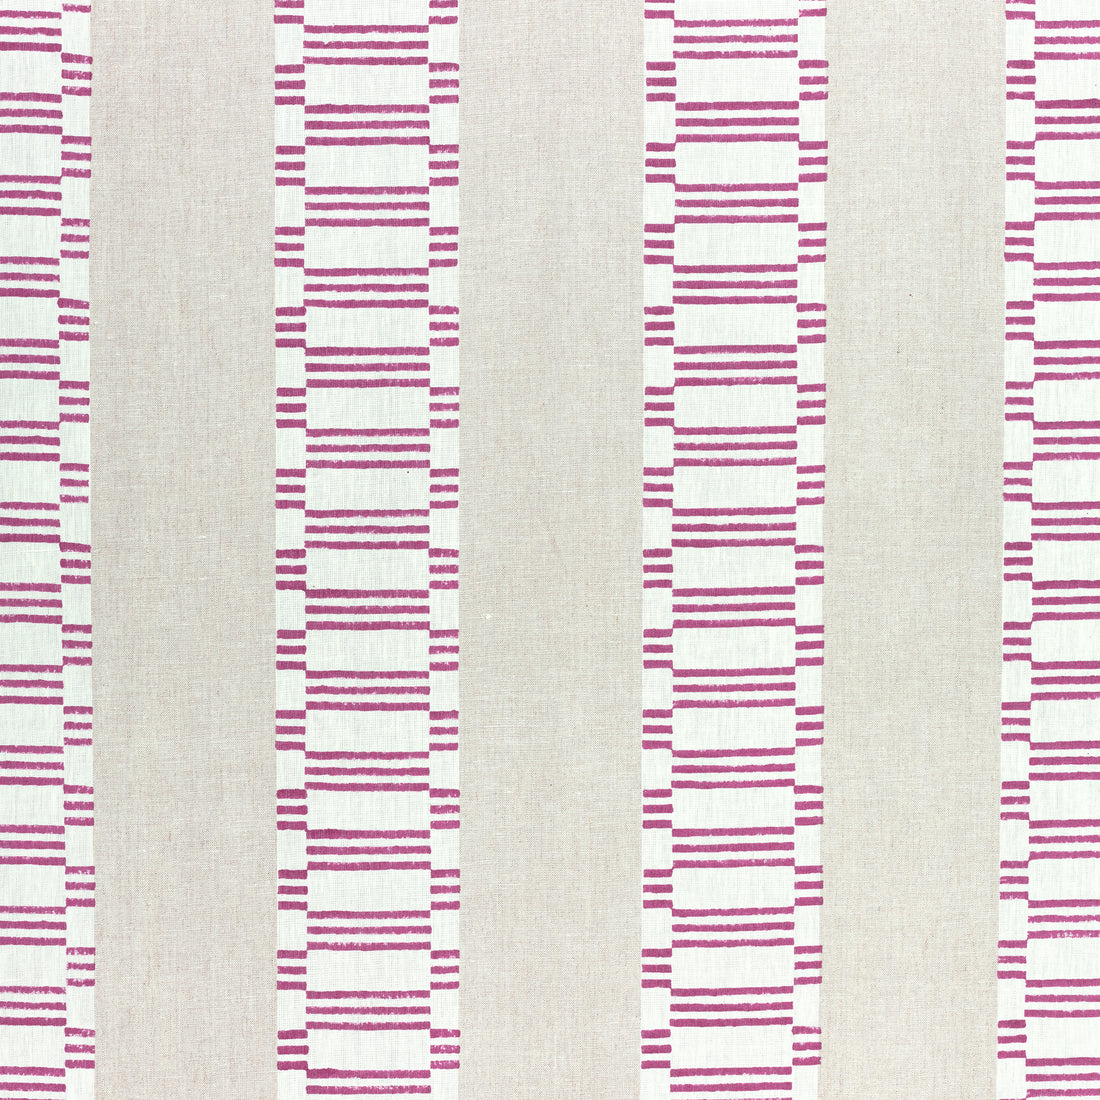 Japonic Stripe fabric in fuchsia color - pattern number AF9822 - by Anna French in the Nara collection